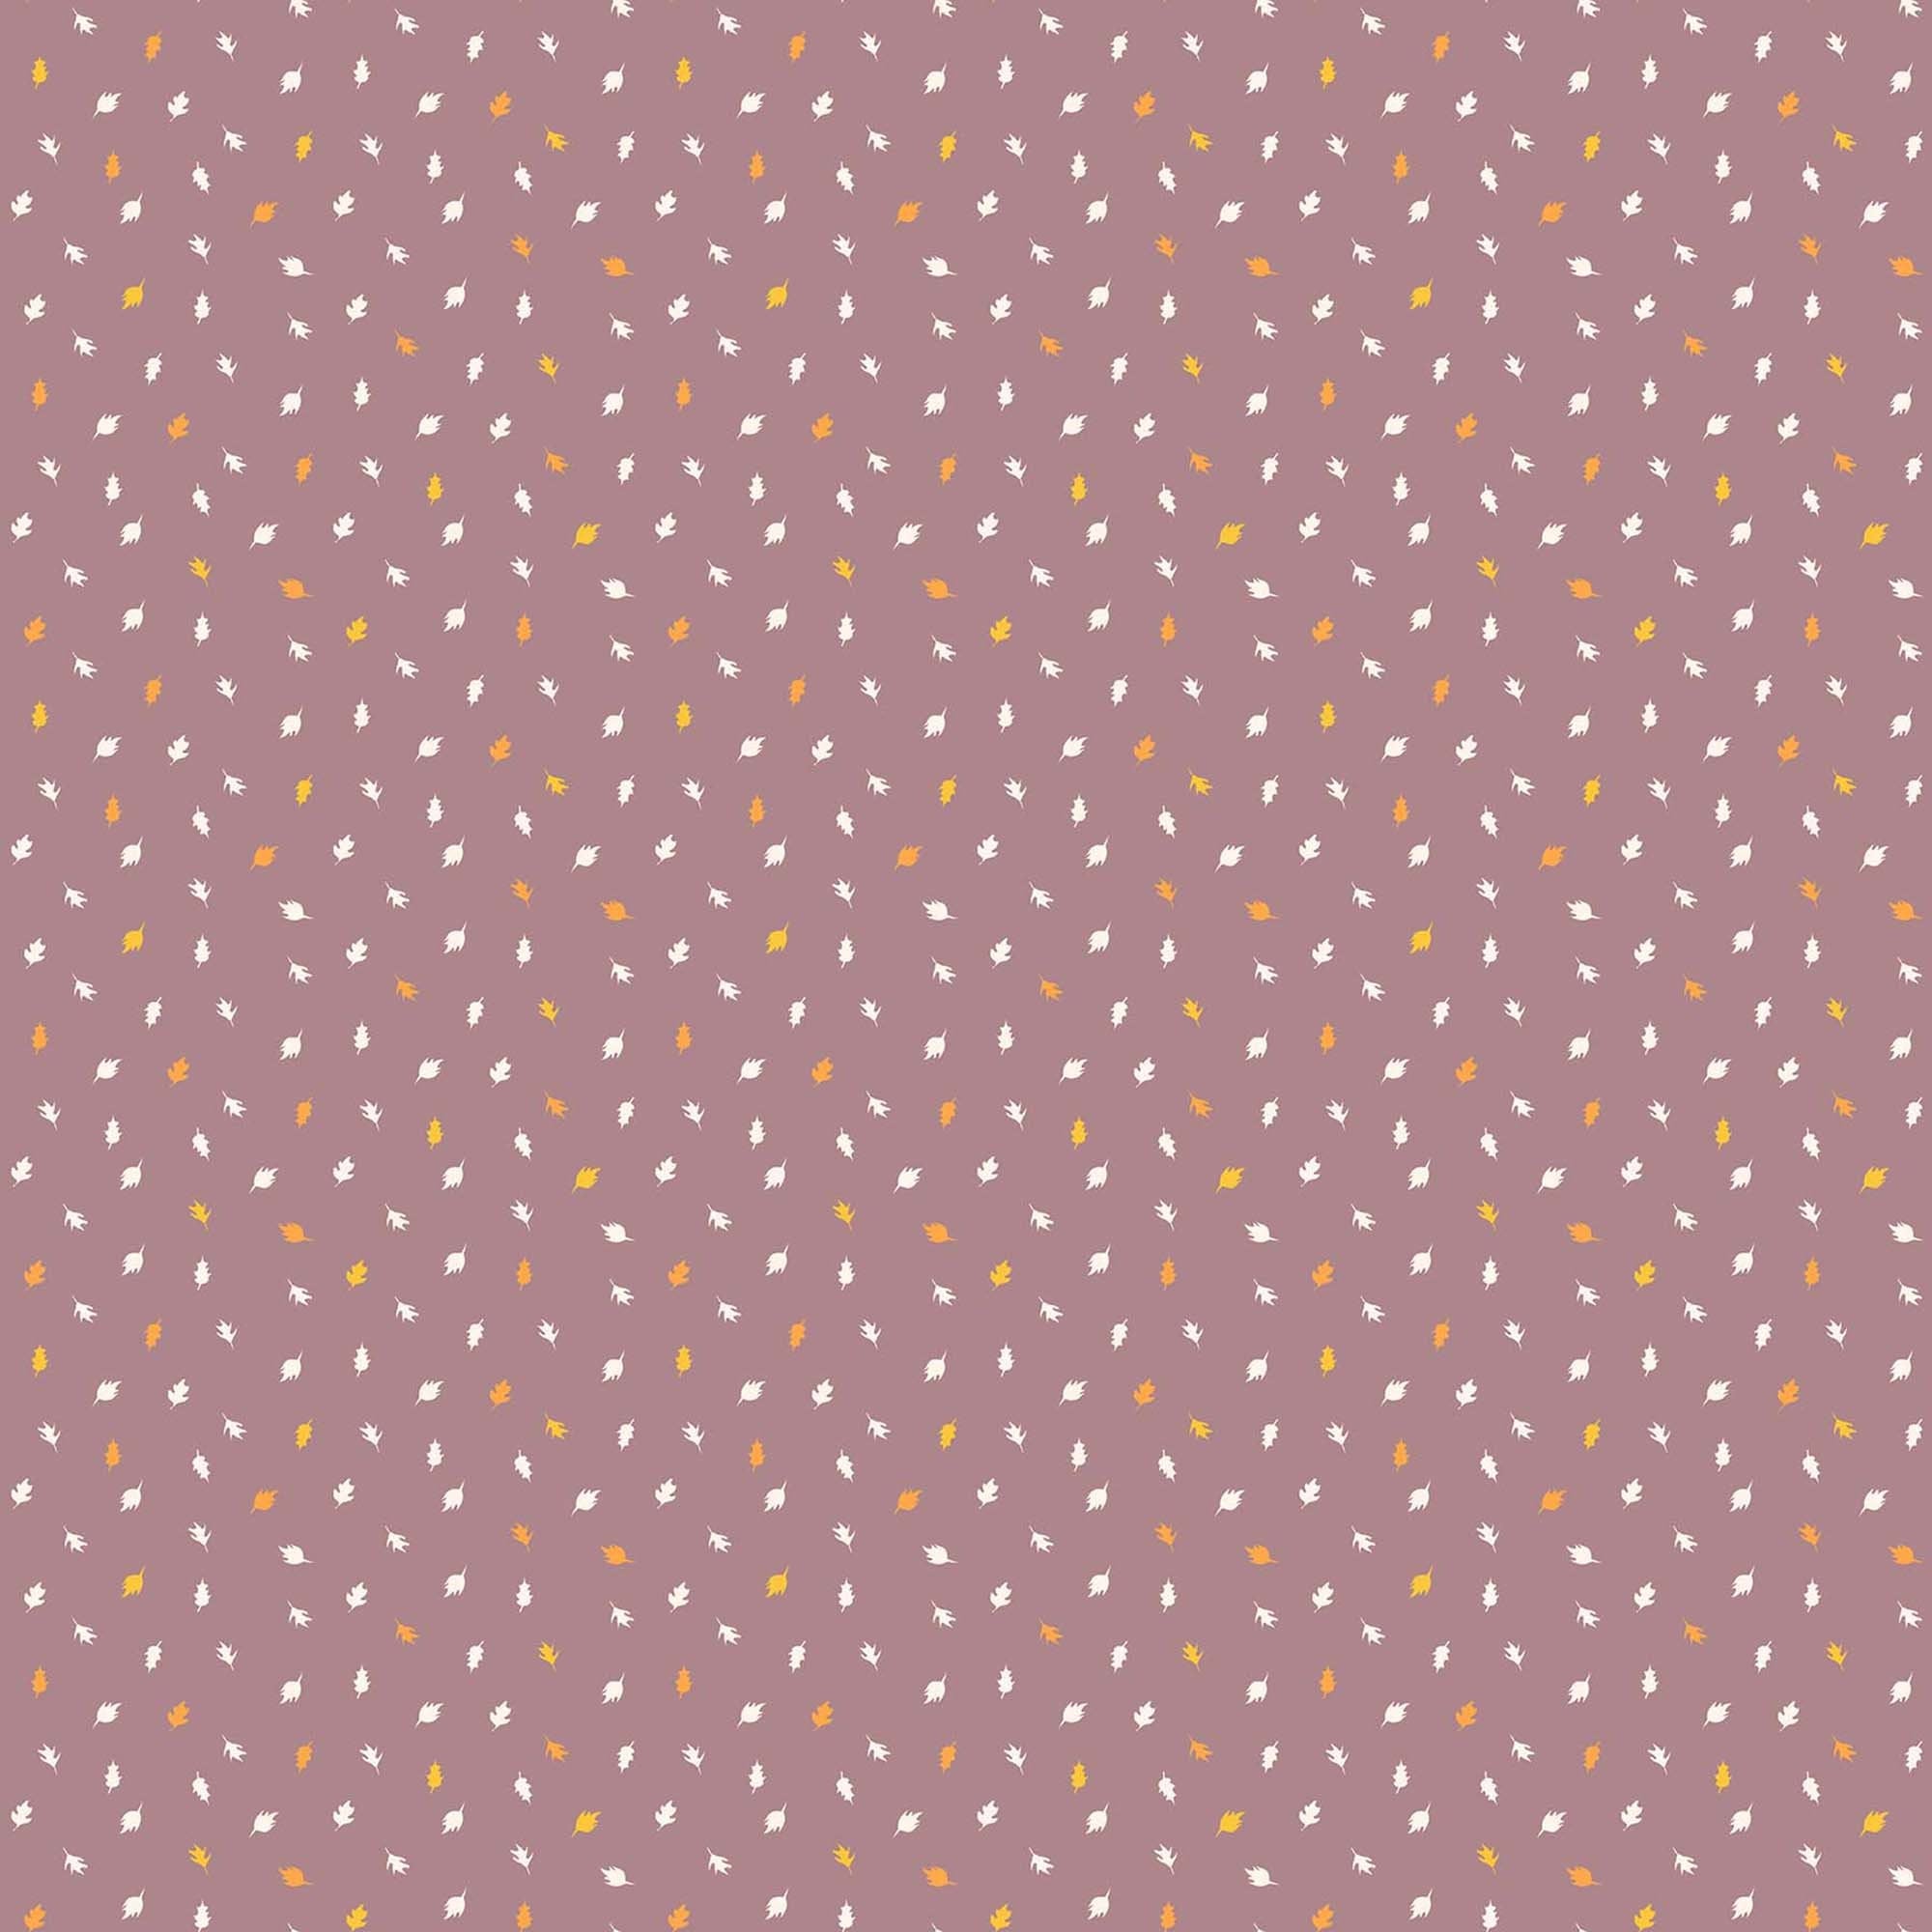 Summer's End - Ditsy Leaves Plum Fabric